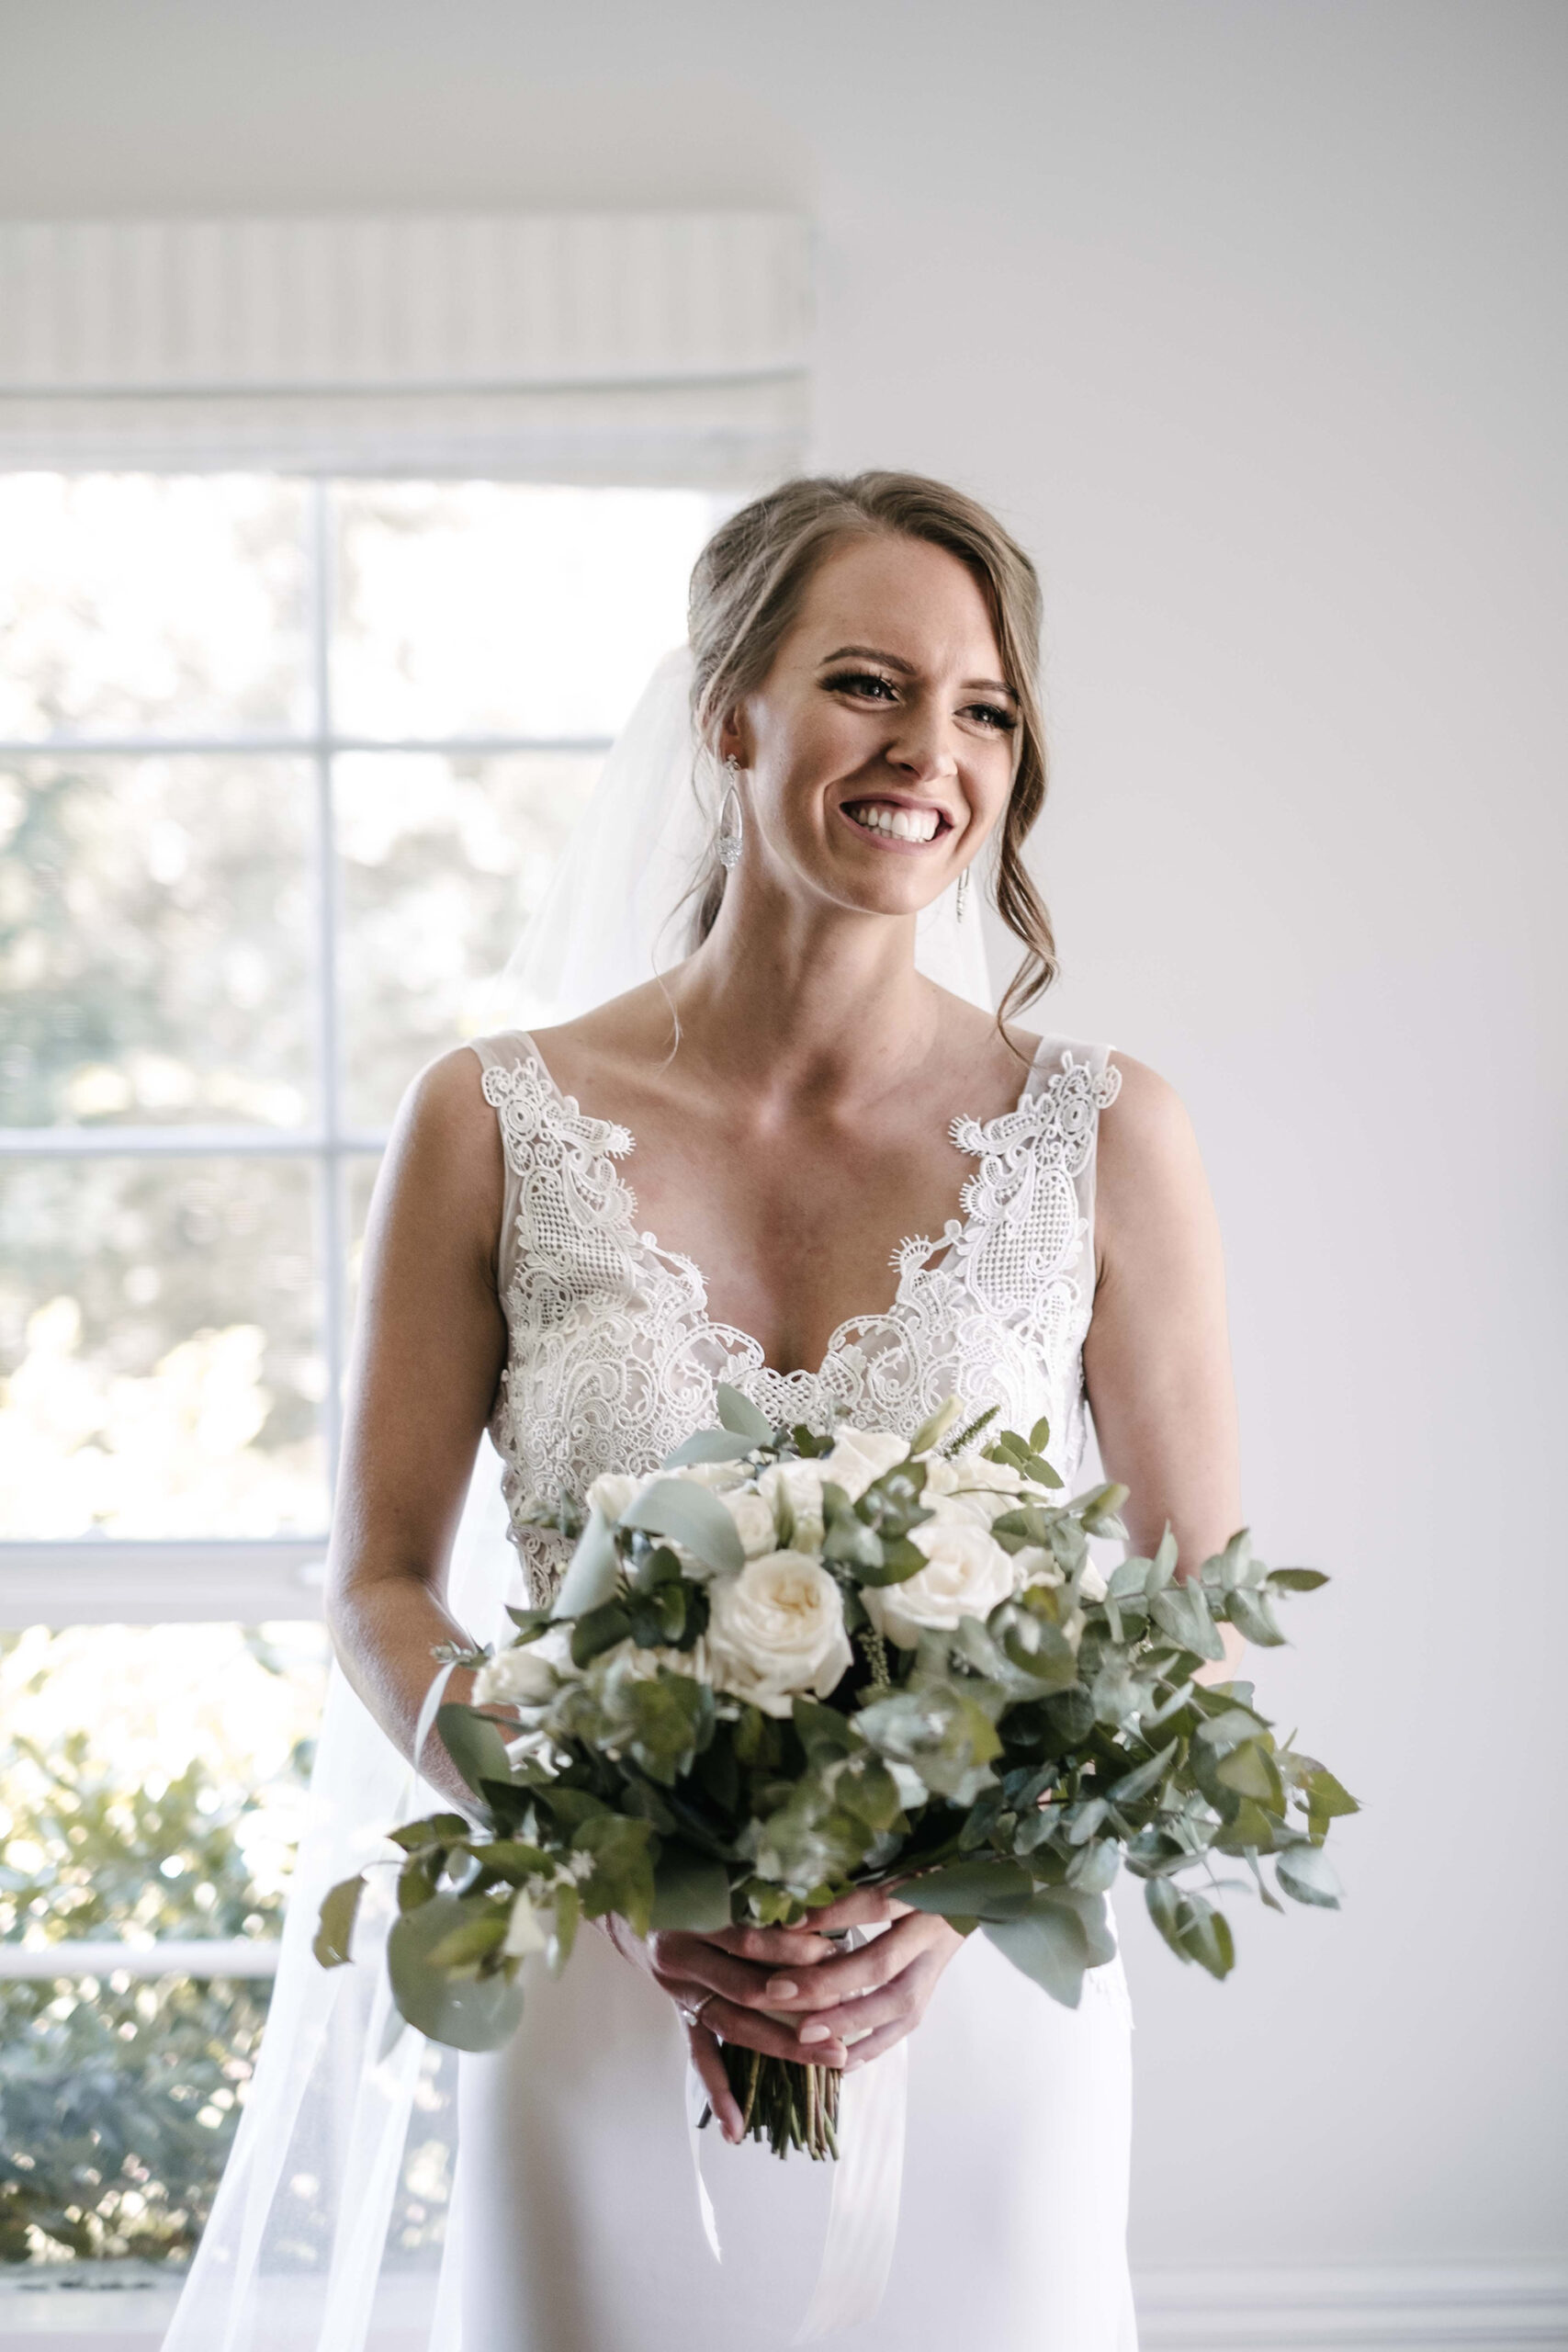 Emily Andrew Modern Rustic Wedding Charmaine Visuals SBS 005 scaled